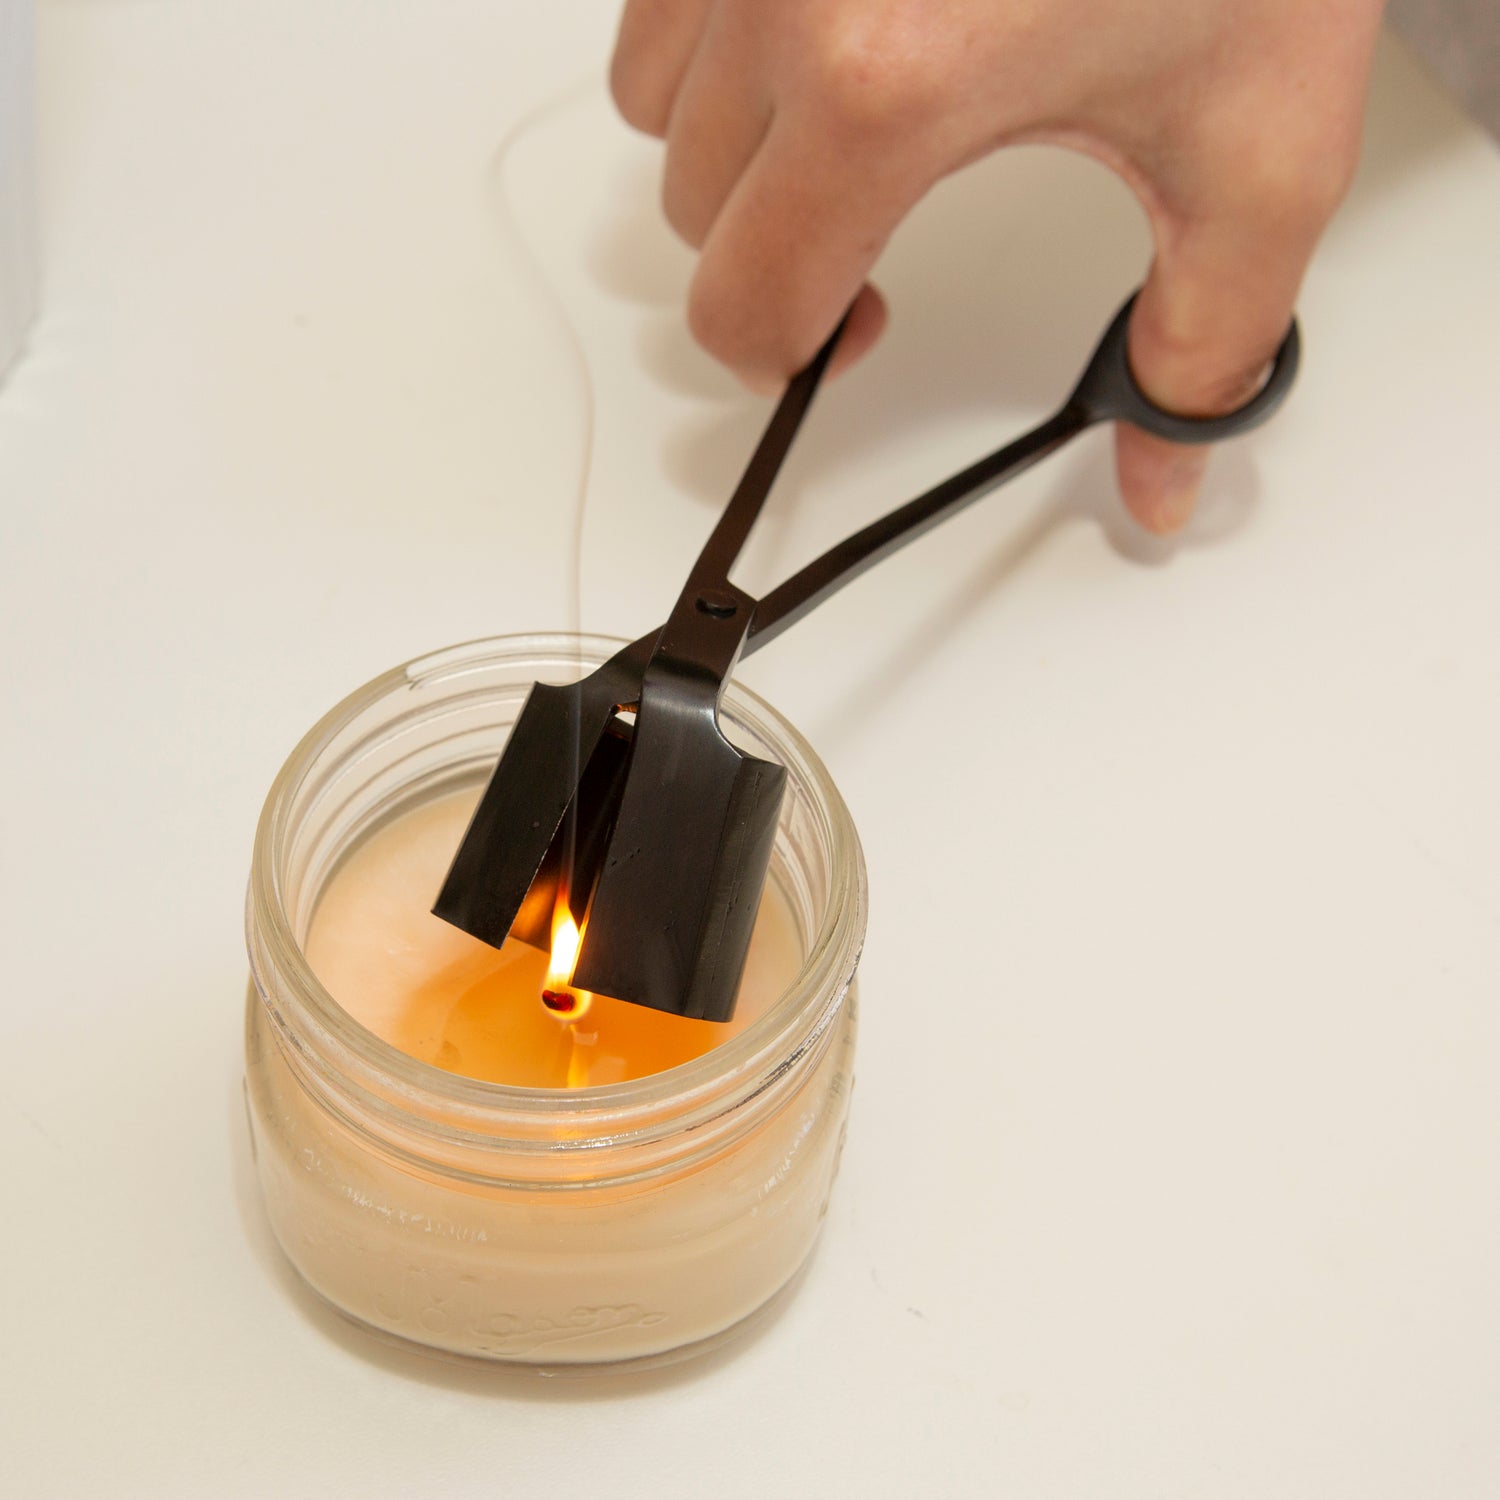 Wick Dippers 101: Unlocking the Secrets of this Essential Candle Tool –  Loft81 Home